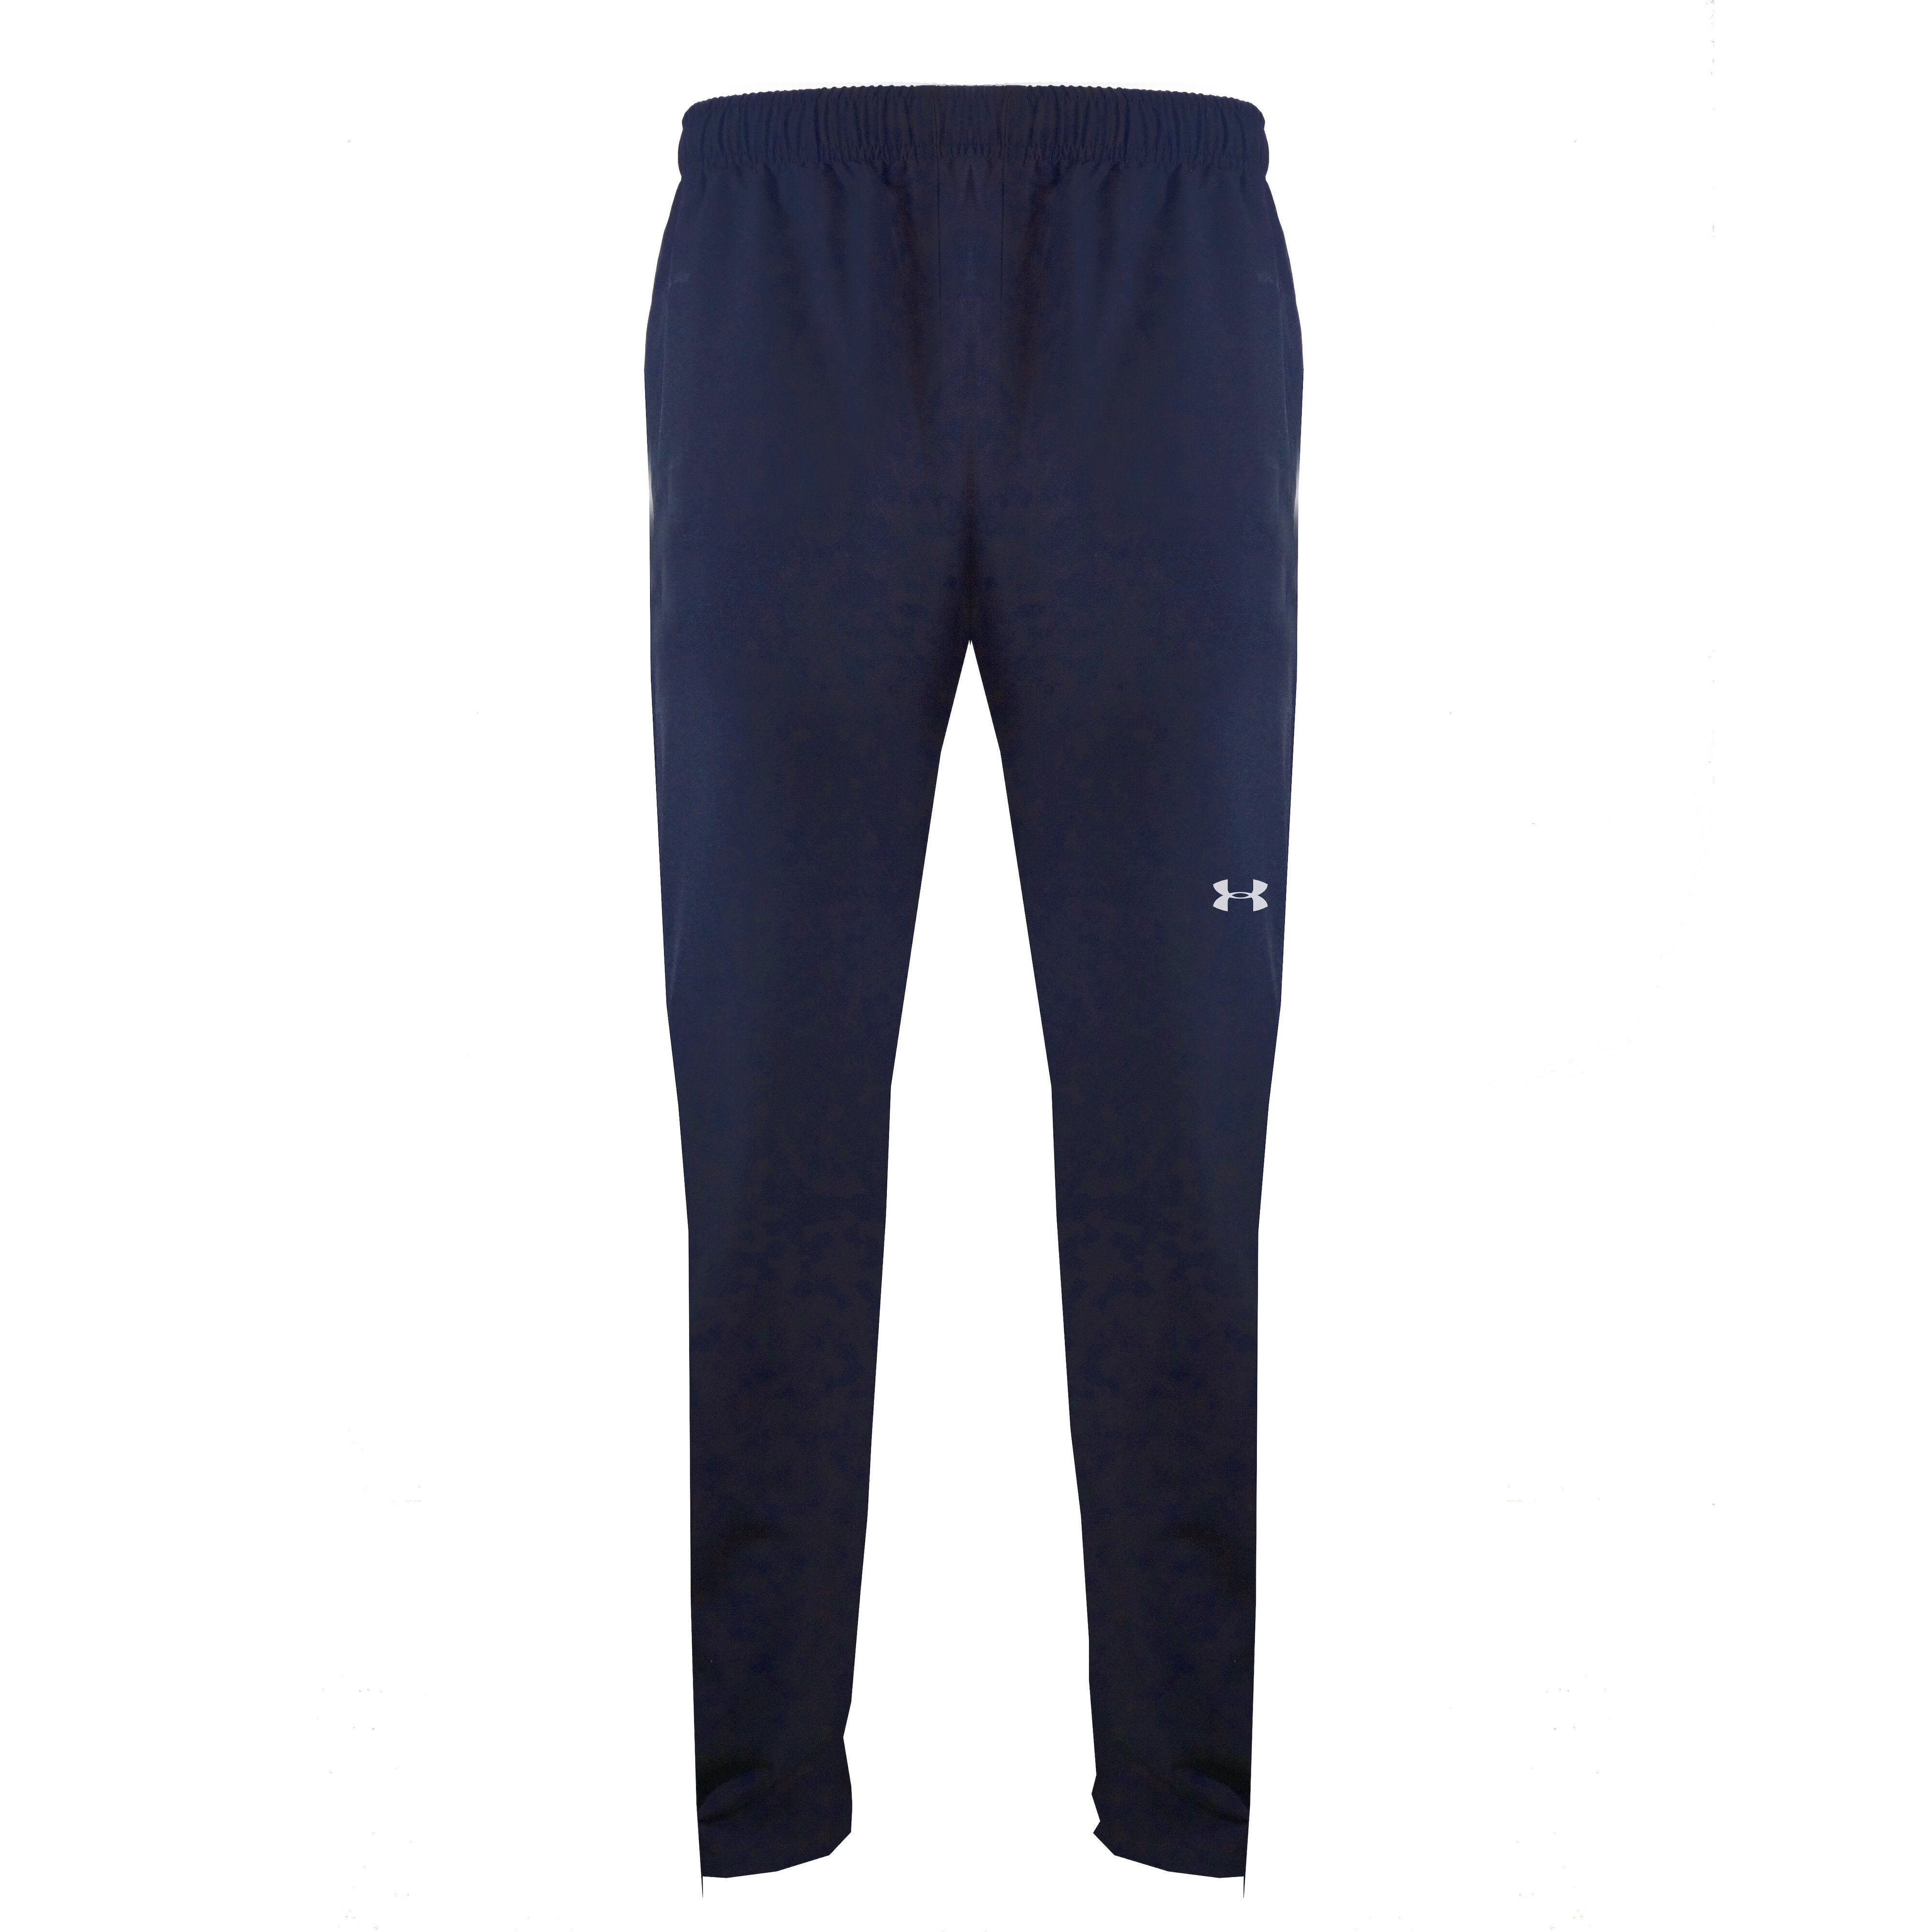 Under Armour Challenger Pants - Navy - Total Football Direct